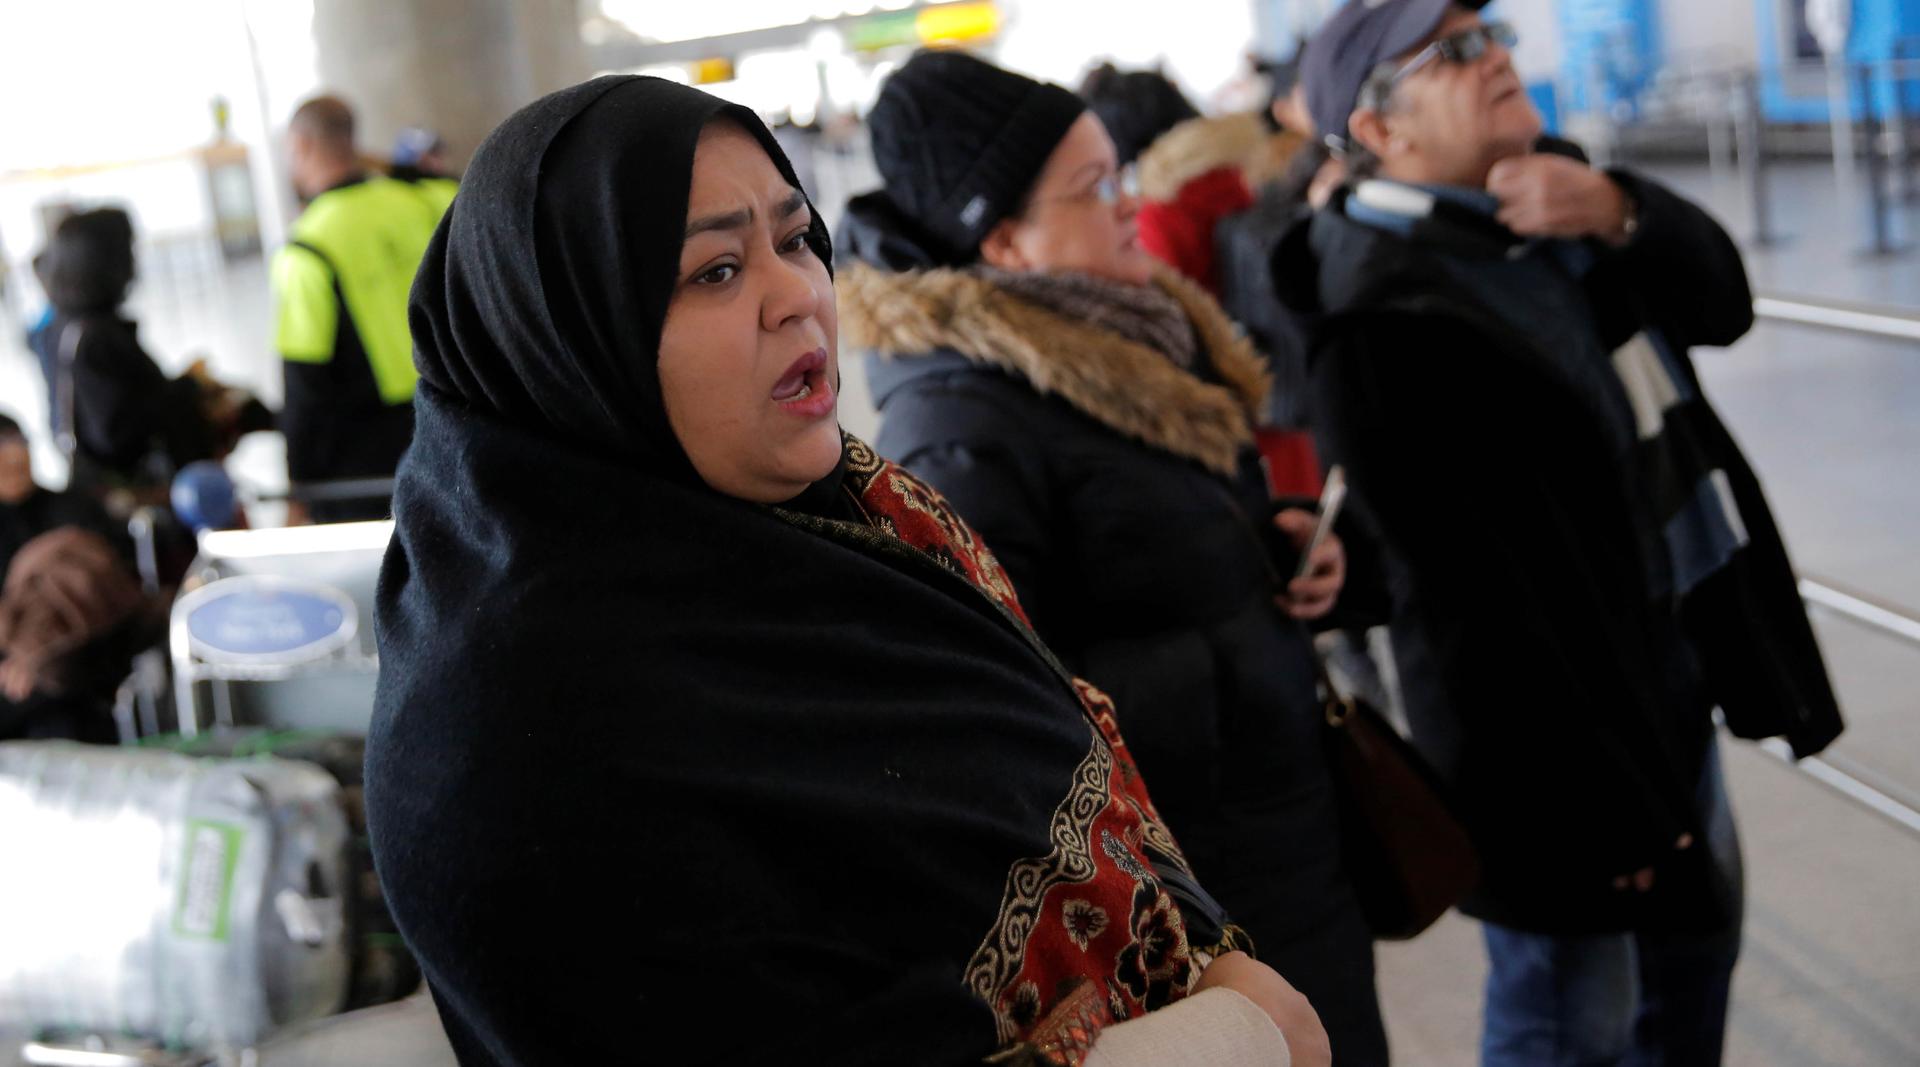 A woman waits for family to arrive at John F. Kennedy International Airport in Queens, New York, on Jan. 28.